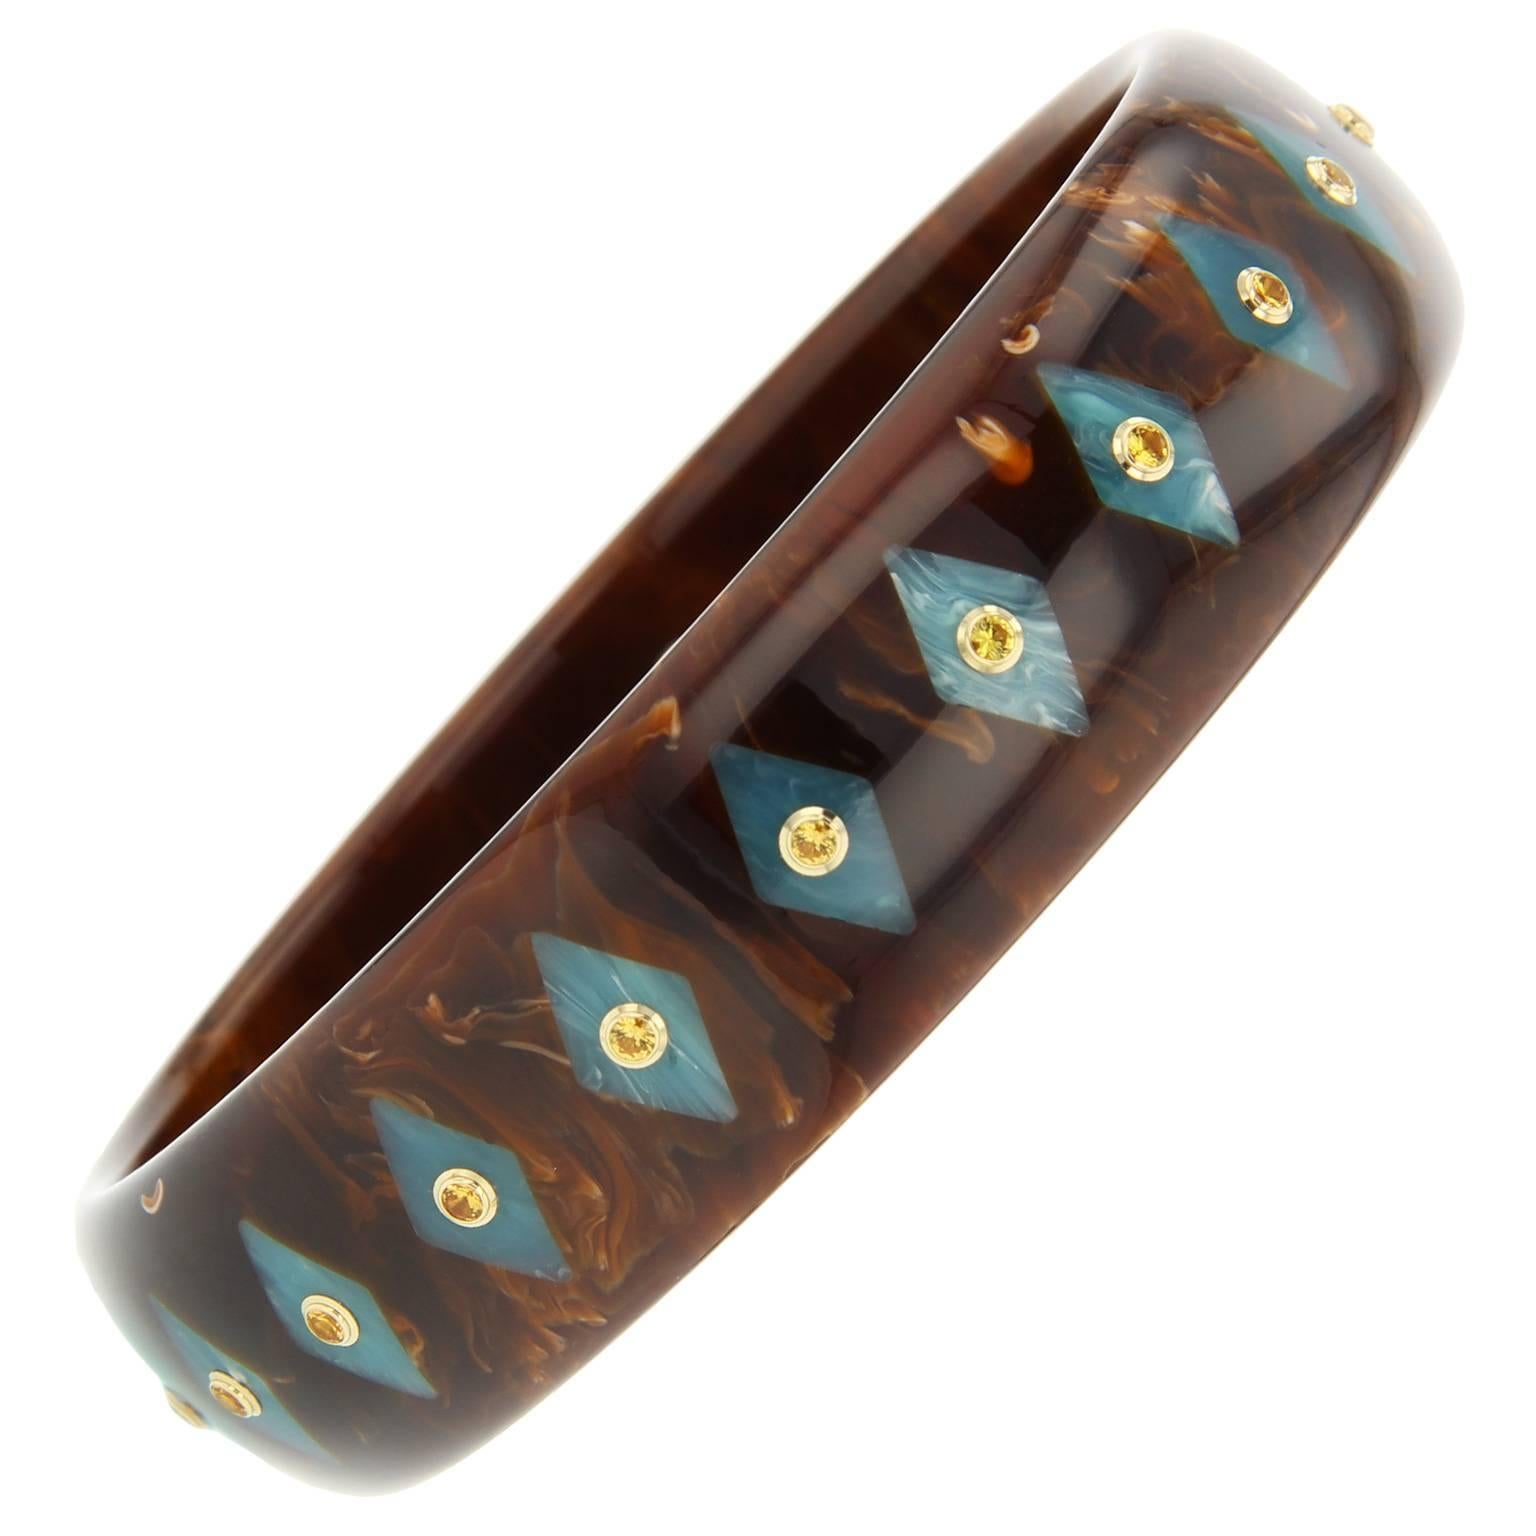 This Mark Davis Collector bangle was handcrafted using marbled brown and light blue  bakelite. Centered within the kite-shaped inlay pattern is a yellow sapphire set in 18k yellow gold.  

Full details below: 
• From the Mark Davis Collector line
•